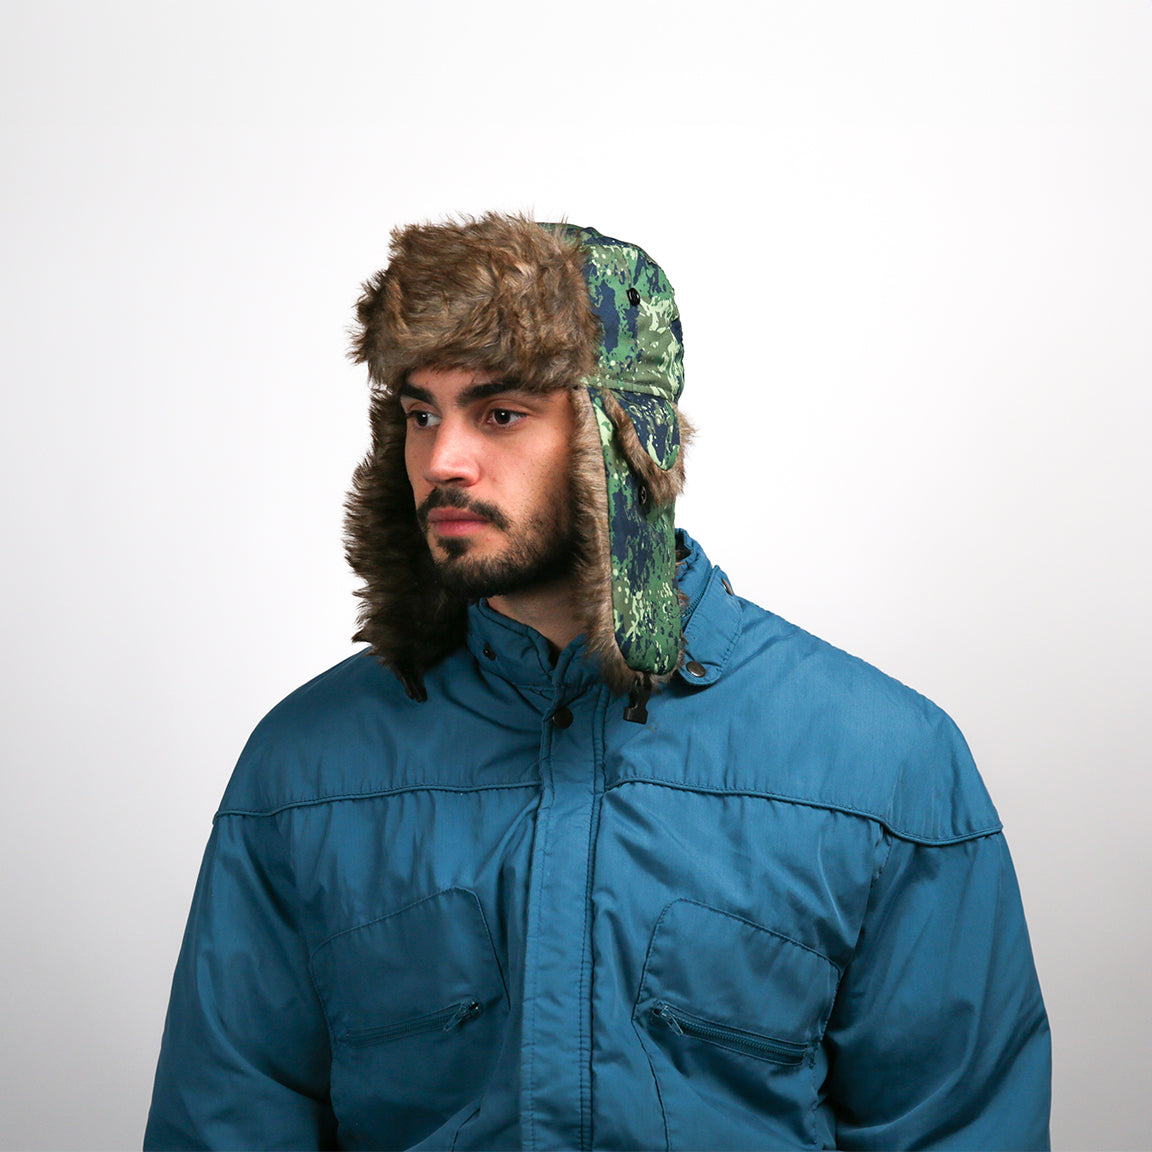 Pictured is a person wearing an aviator hat with a green camo pattern and brown faux fur lining. The design includes functional ear flaps and a buttoned chin strap, suited for outdoor activities.